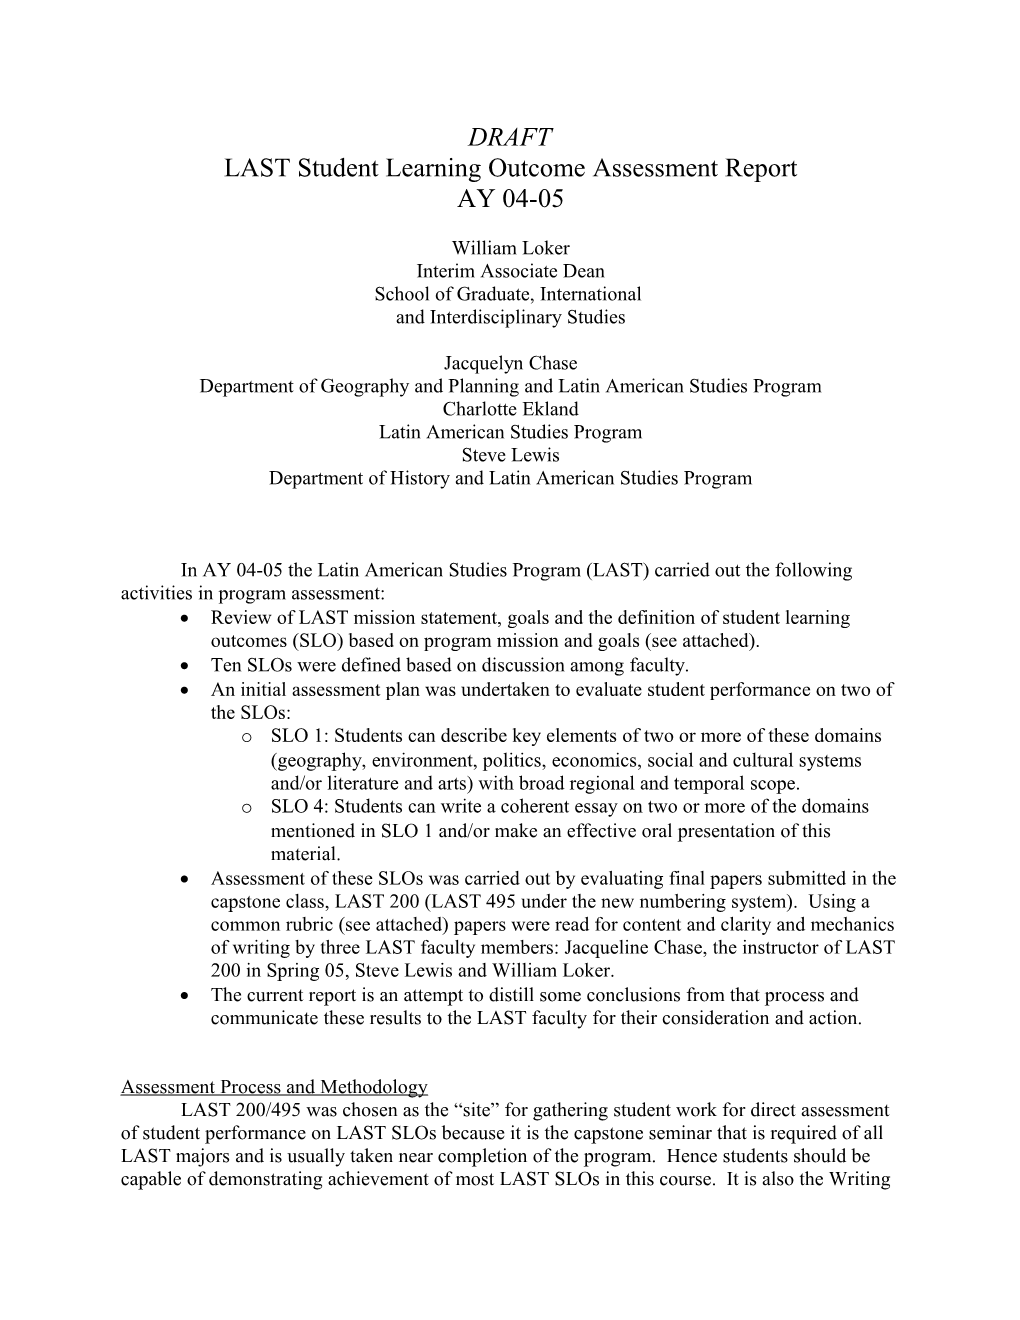 LAST Student Learning Outcome Assessment Report